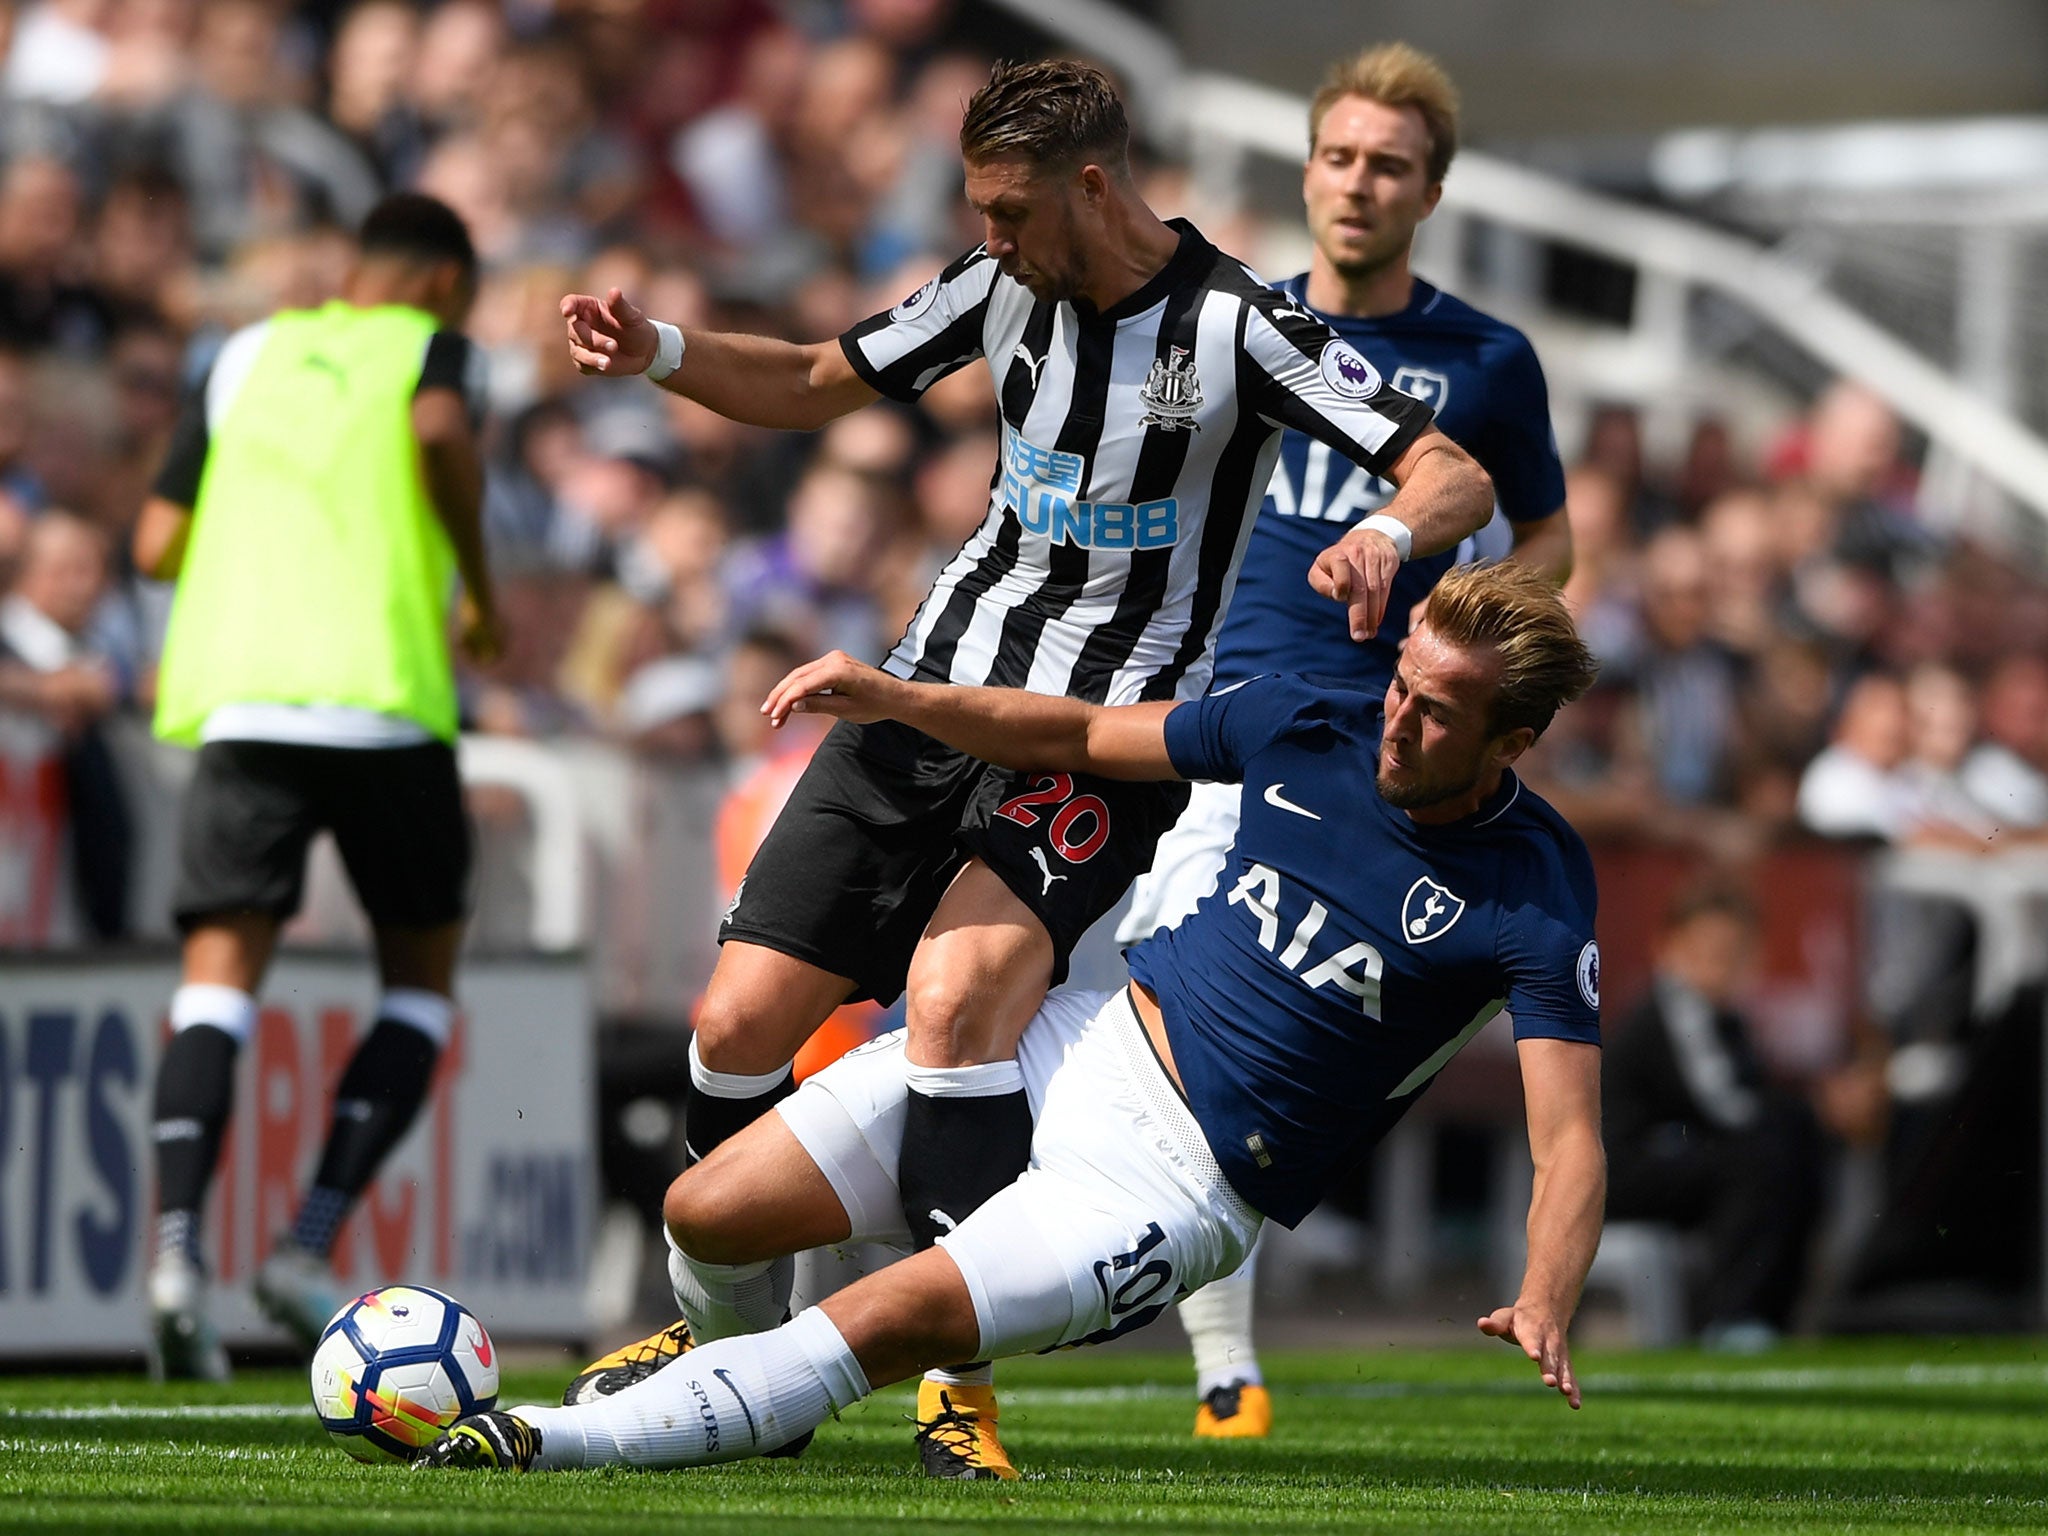 Harry Kane was shown a yellow card for his rash challenge on Newcastle debutant Florian Lejeune